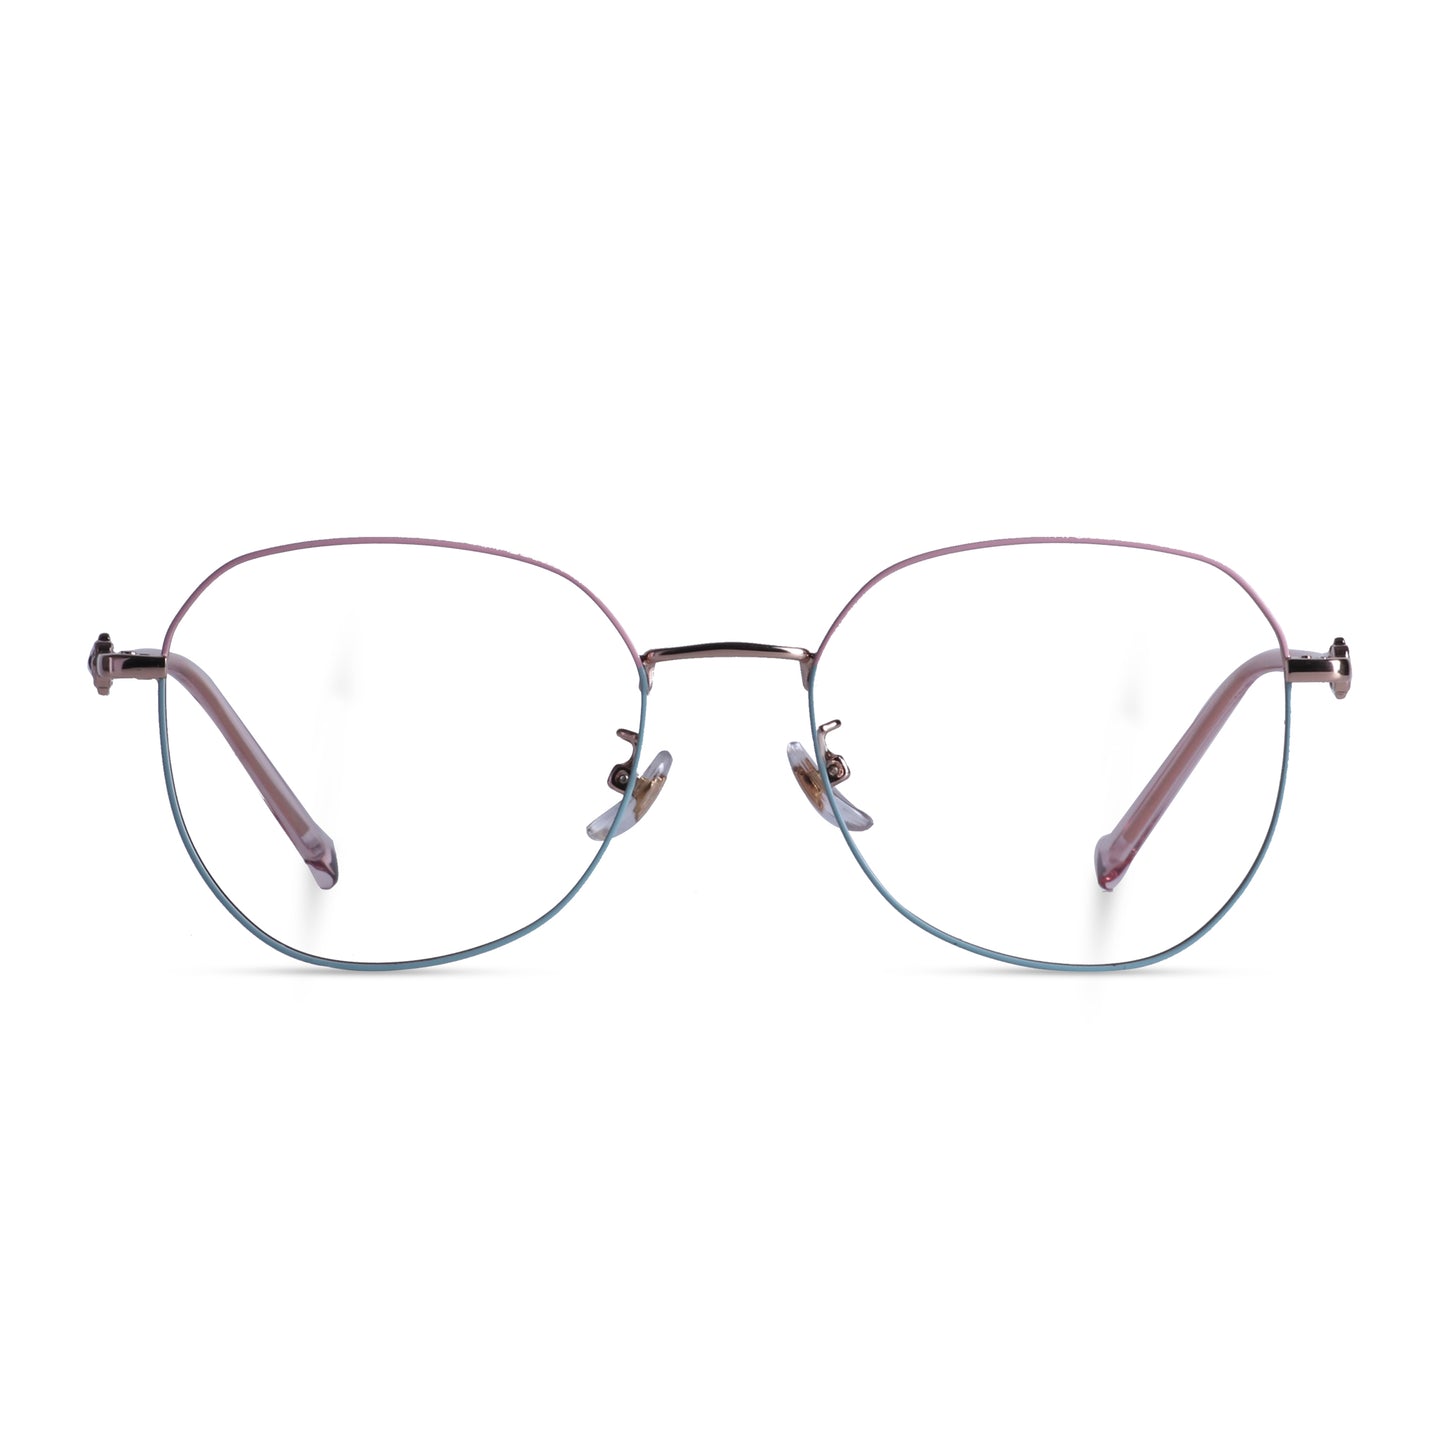 Sirts Black Silver Round S11609 (Including Anti-Glare Lens)